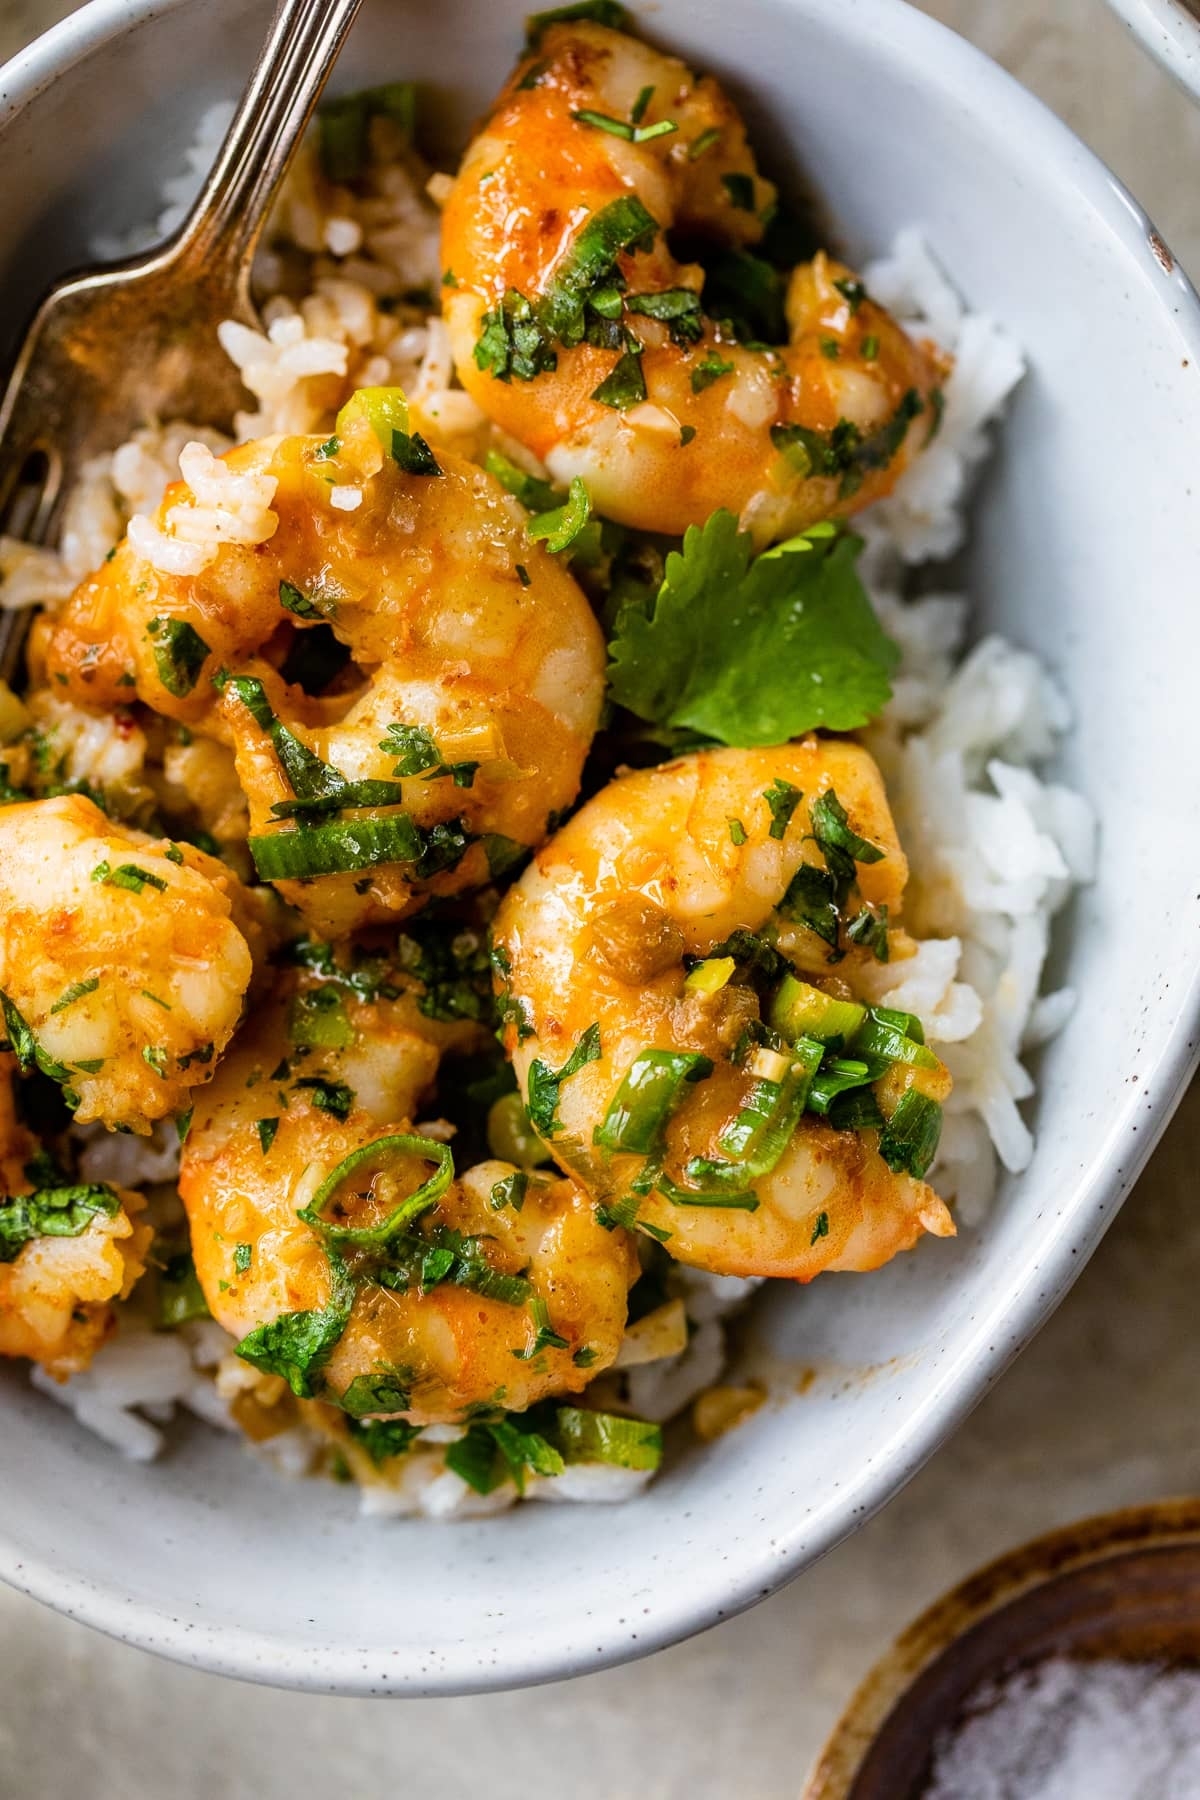 A bowl of shrimp over rice garnished with herbs